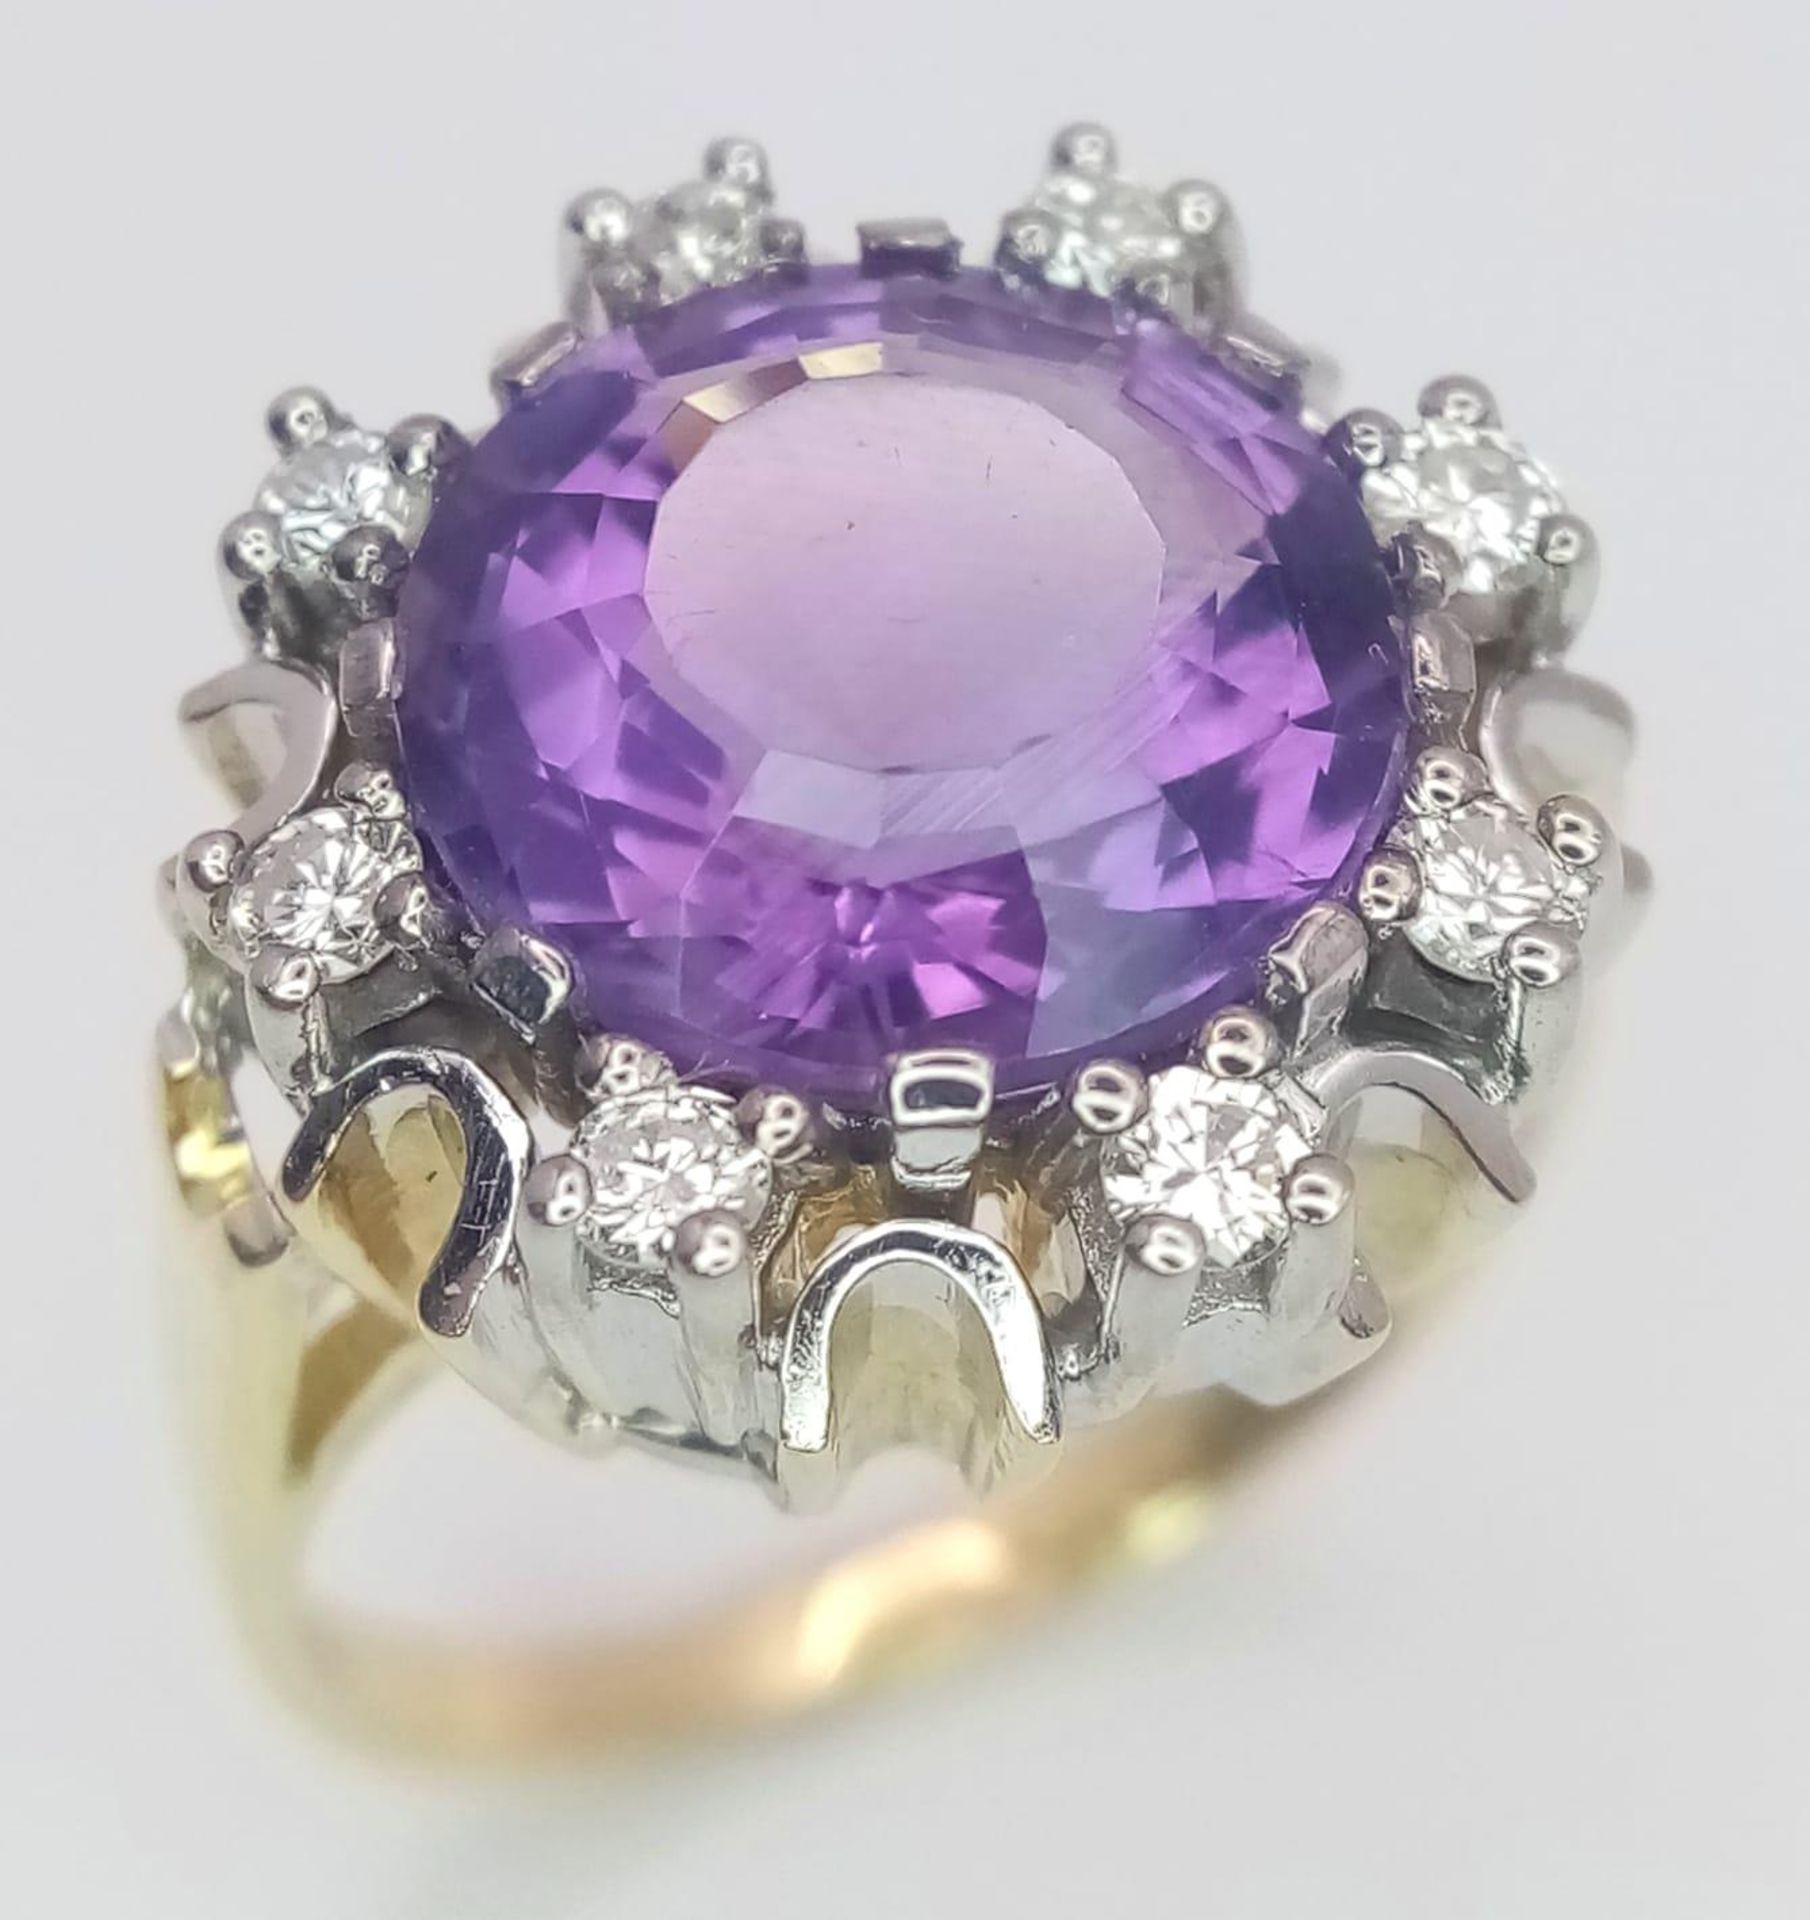 A Gorgeous 14K Yellow Gold Amethyst and Diamond Ring. Central round cut 5ct amethyst with a